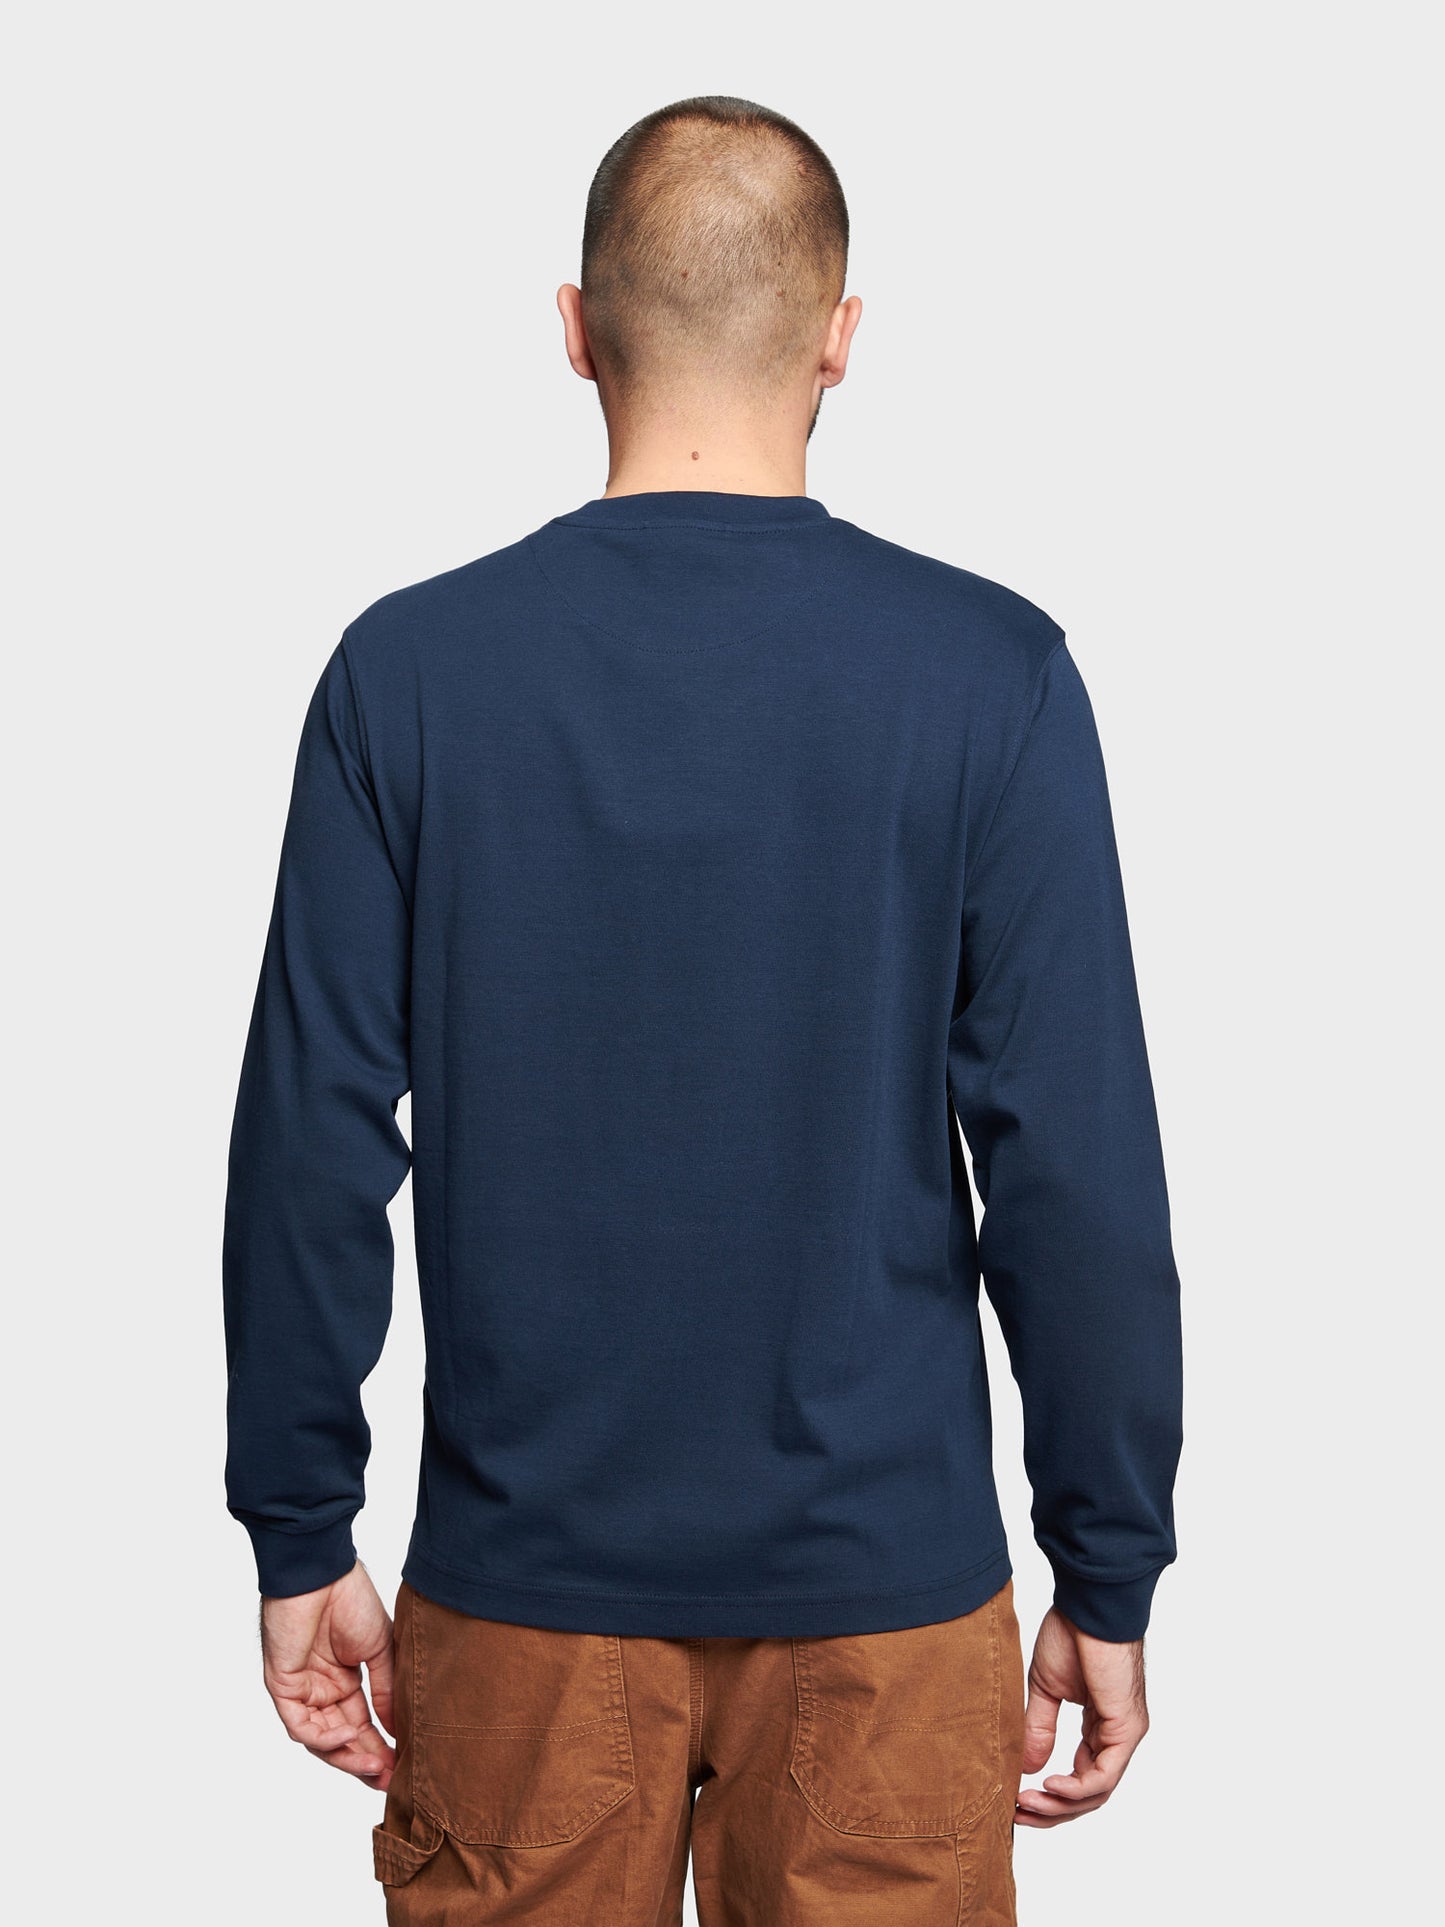 Chest Pocket Long Sleeve T-Shirt in Navy Blue